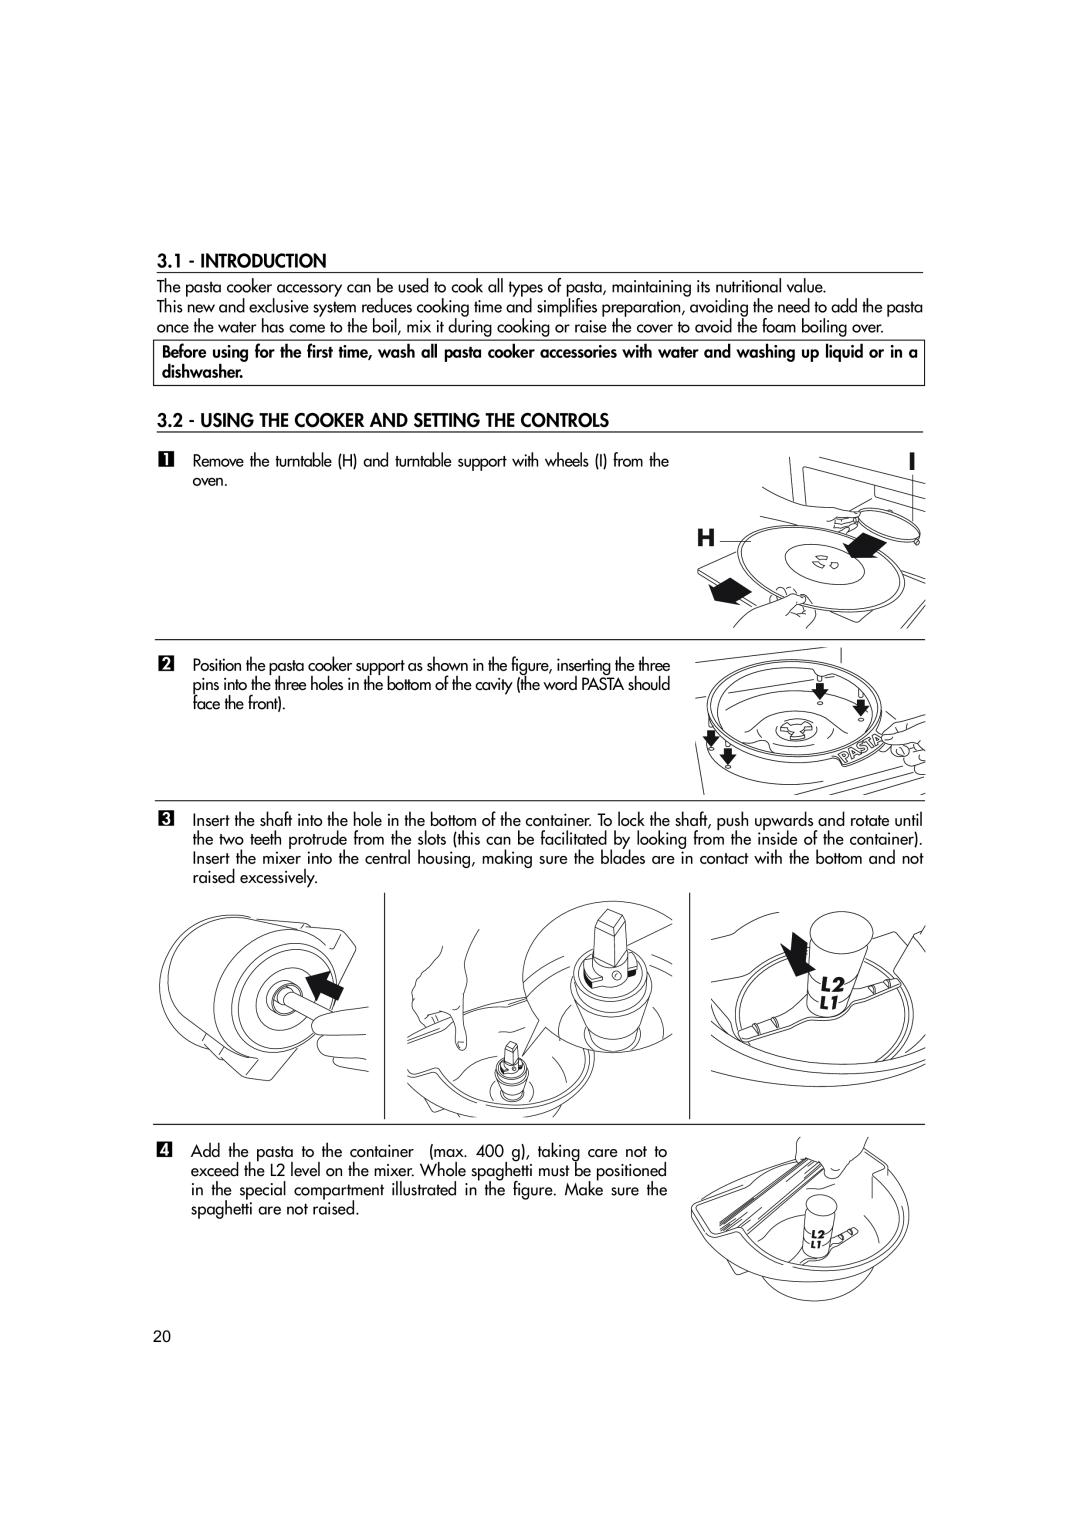 Hotpoint MWHZ33 manual Introduction, Using The Cooker And Setting The Controls 